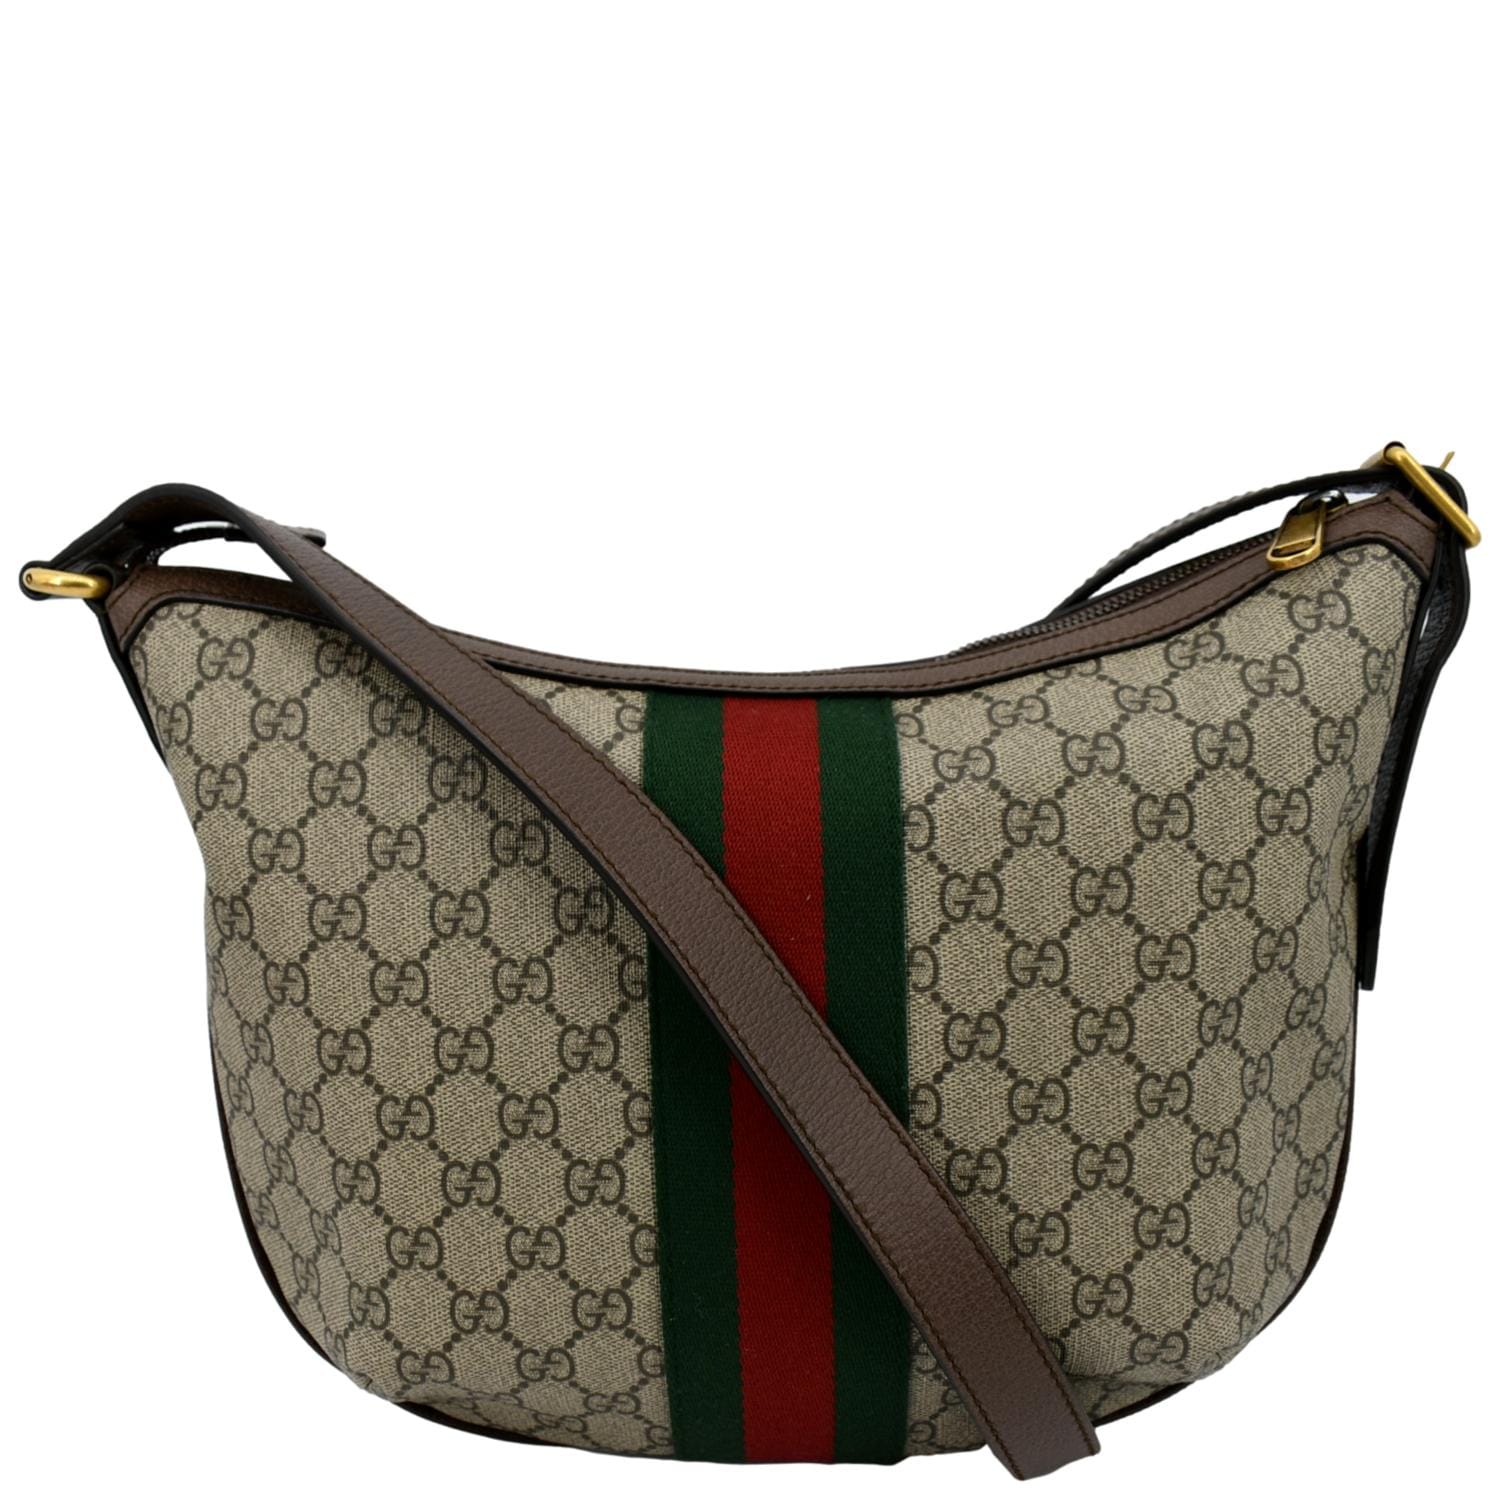 Gucci - Ophidia GG Small Messenger Bag